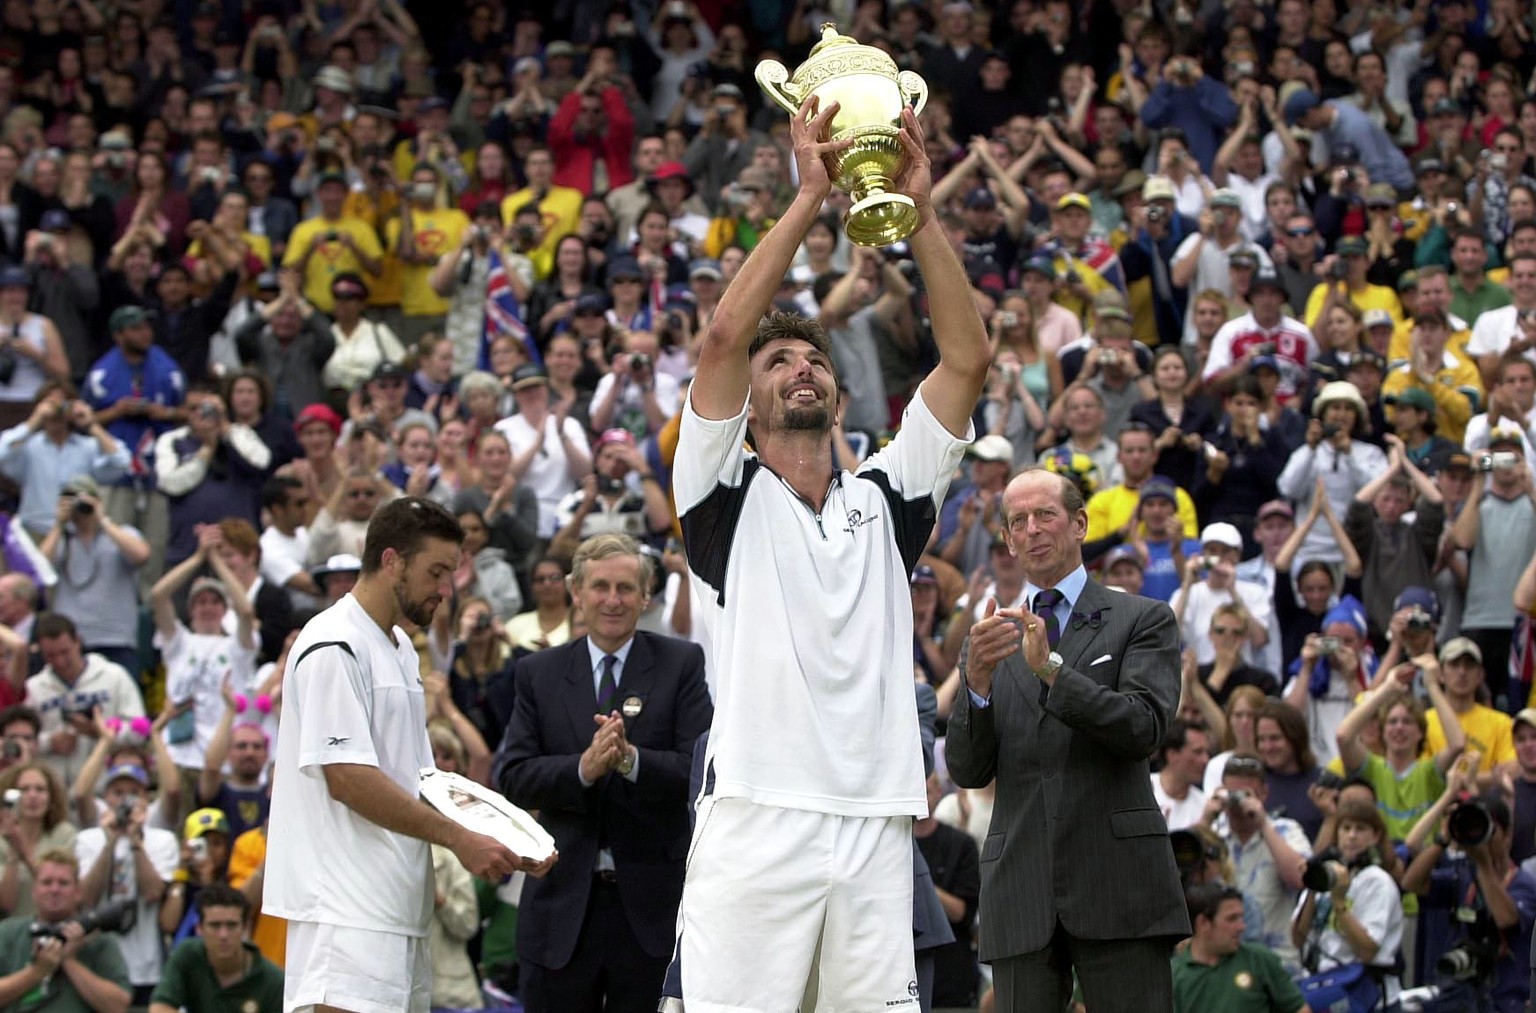 9 Jul 2001: Goran Ivanisevic of Croatia lifts the Wimbledon trophy after beating Patrick Rafter of Australia during the Men&#039;s Final of The All England Lawn Tennis Championship at Wimbledon, Londo ...